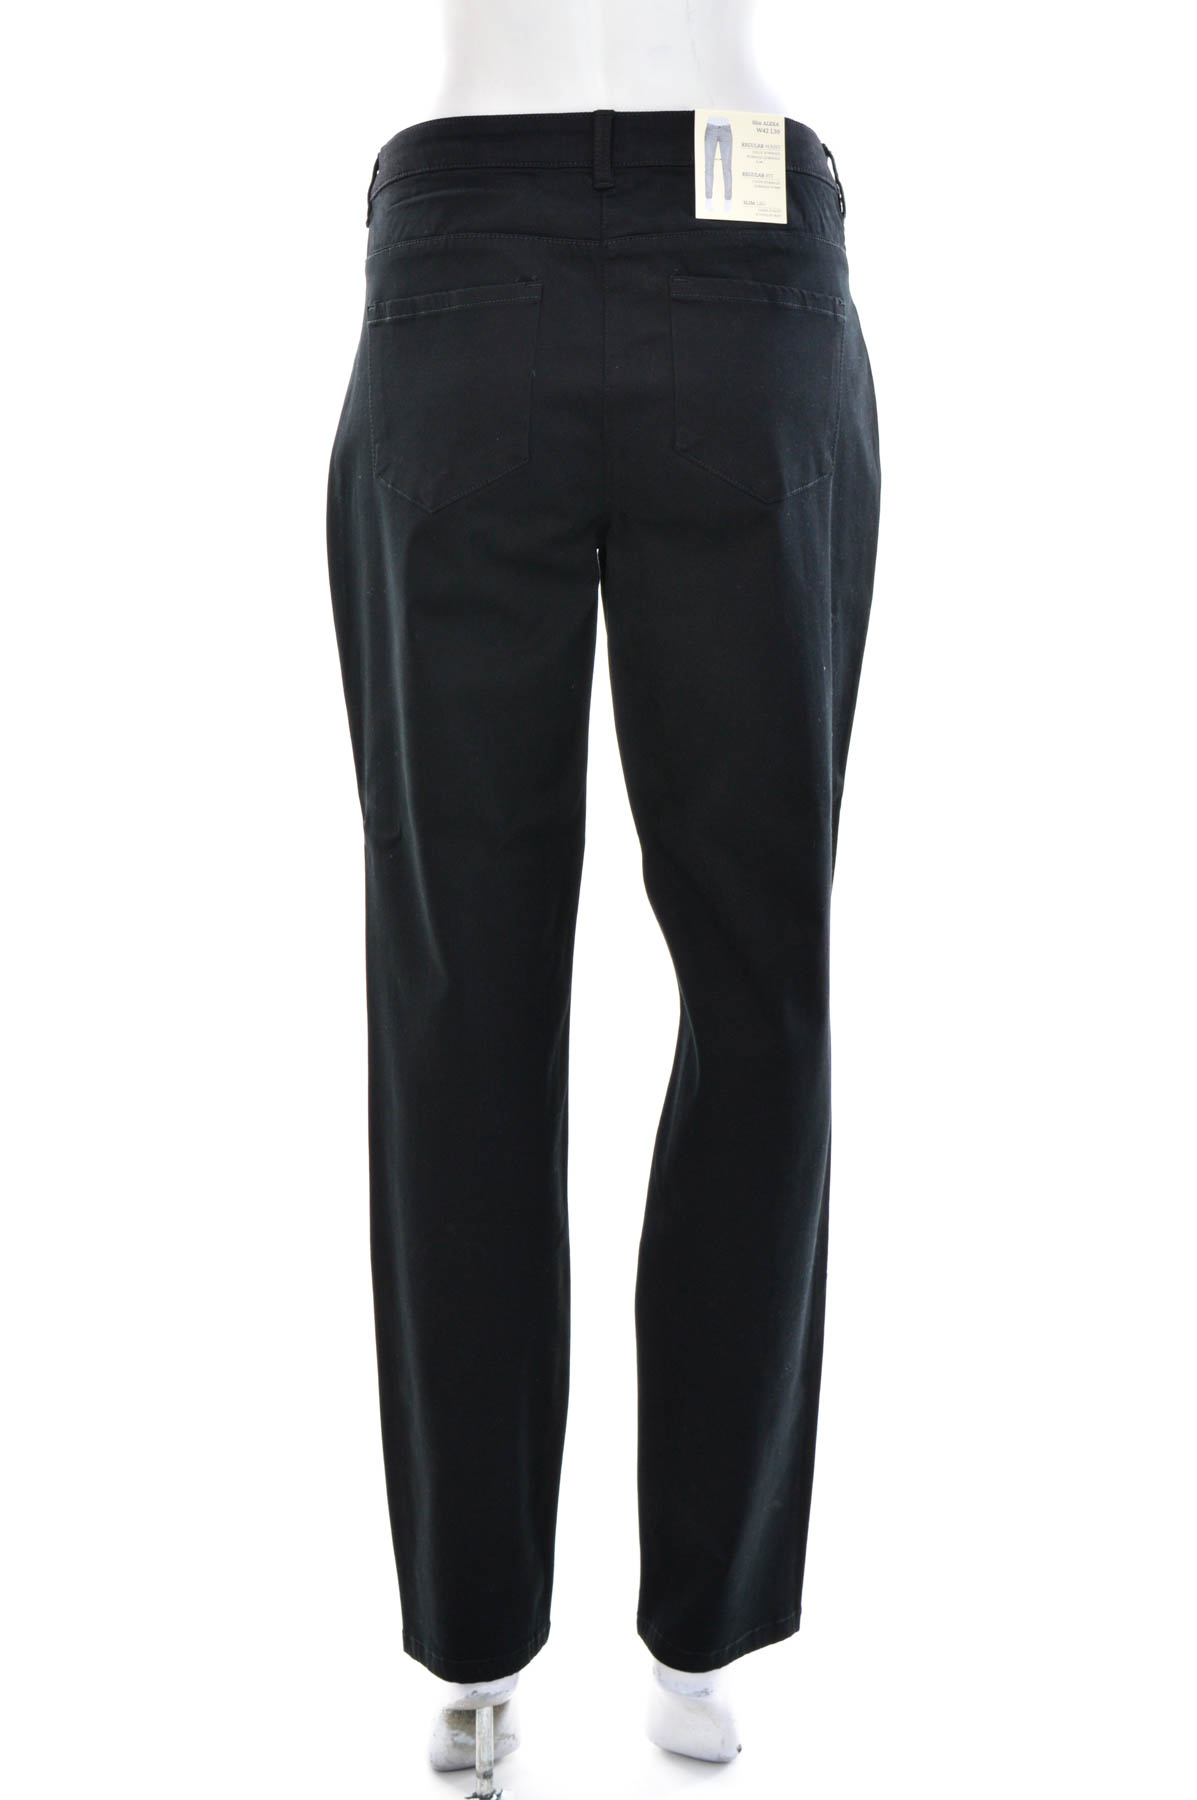 Women's trousers - TOM TAILOR - 1